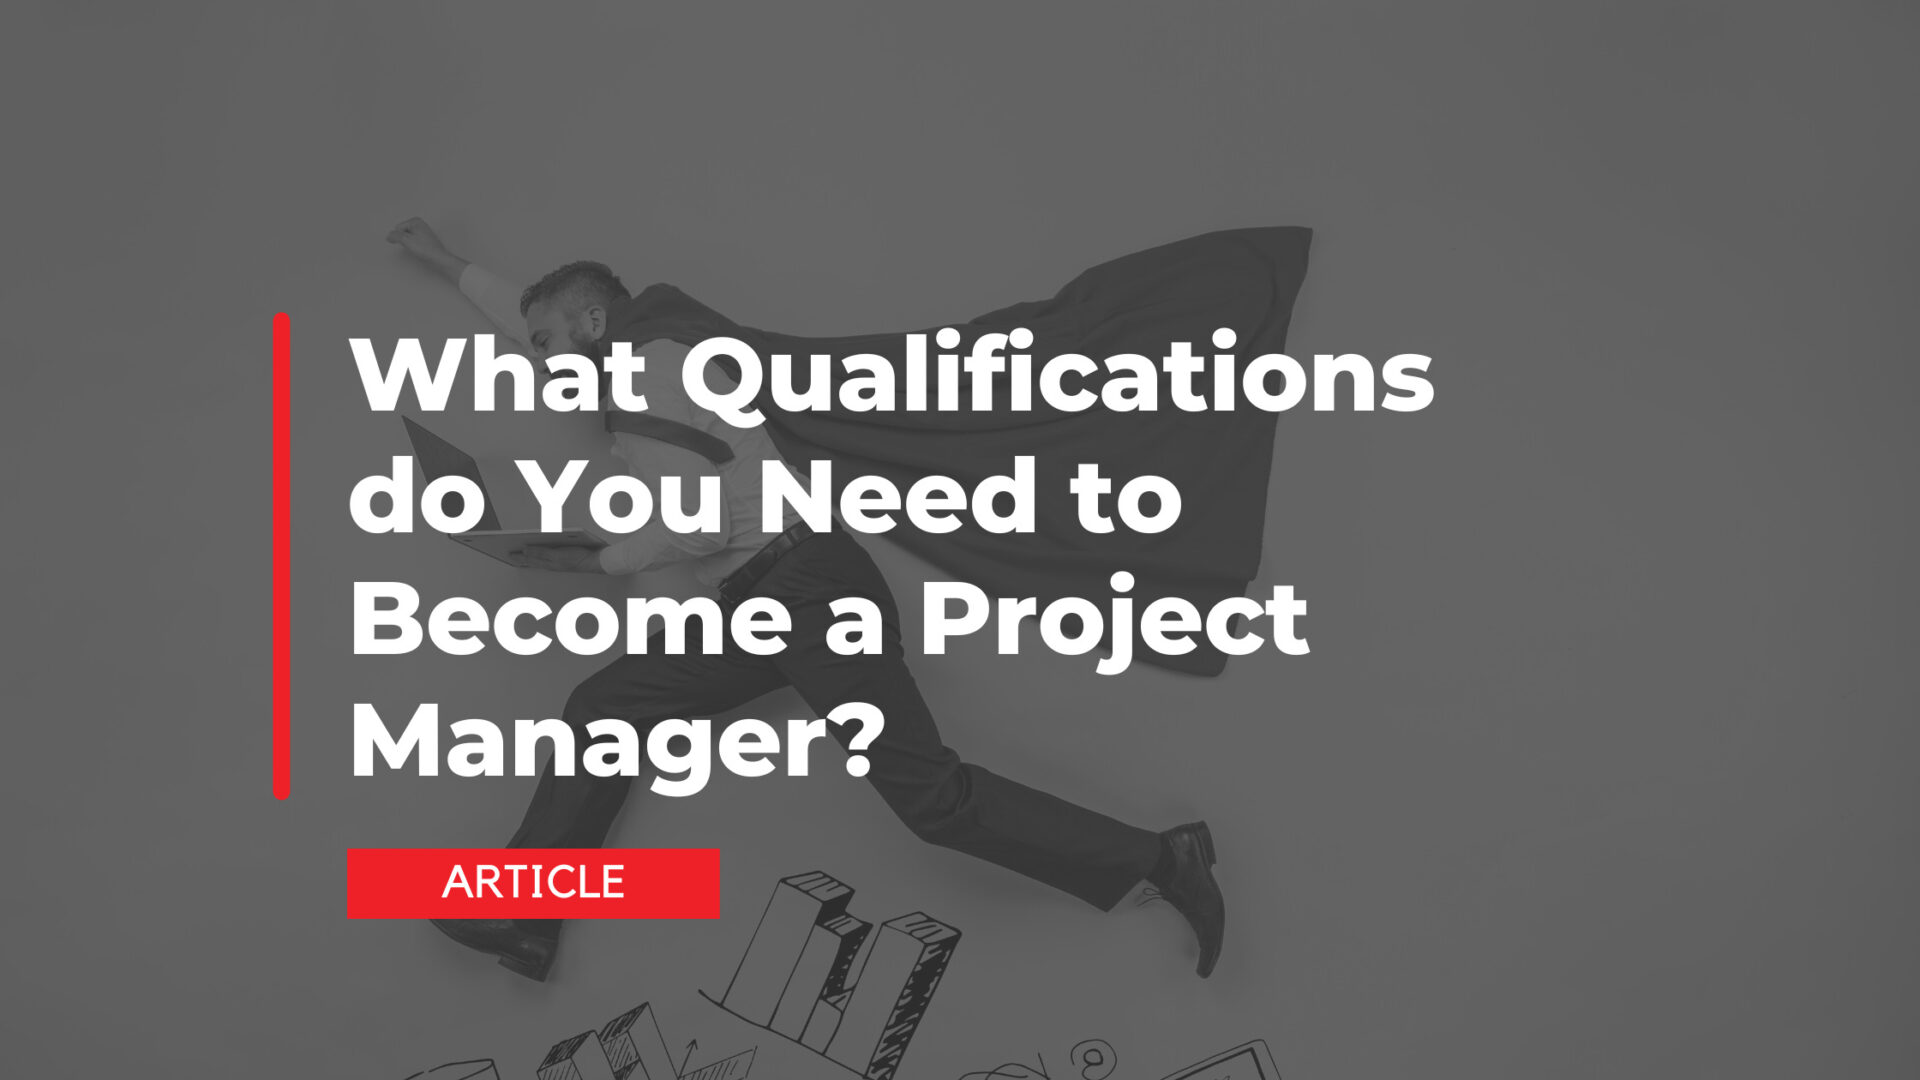 What Qualifications Do You Need to Become a Project Manager?